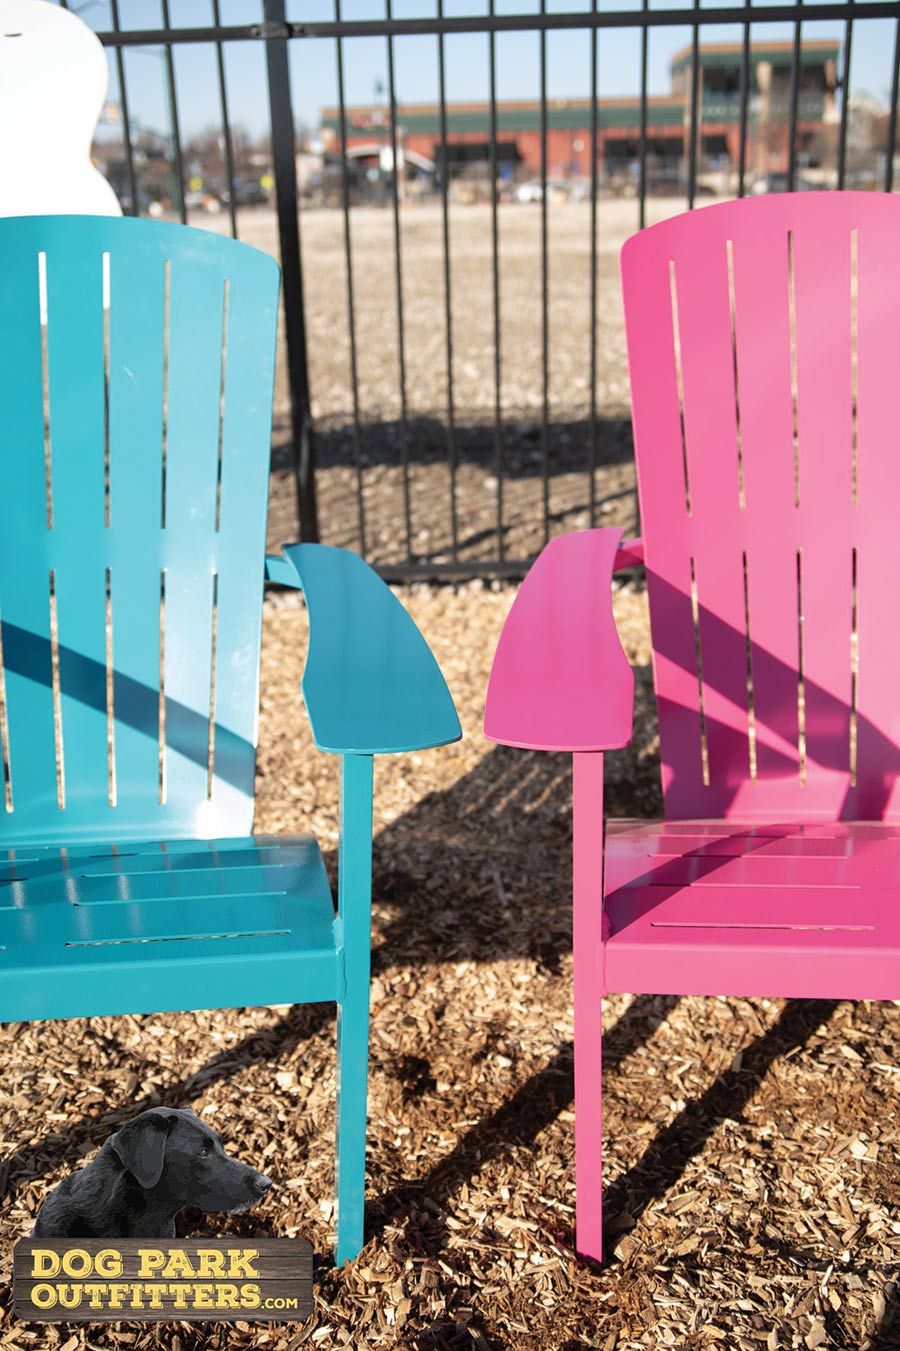 Close-up portrait photograph view of The Dog Park Lounge Chairs side by side (blue on the left, pink on the right) from Dog Park Outfitters as the chairs are outside somewhere on top of dark/light brown wood chips surface nearby a black fence